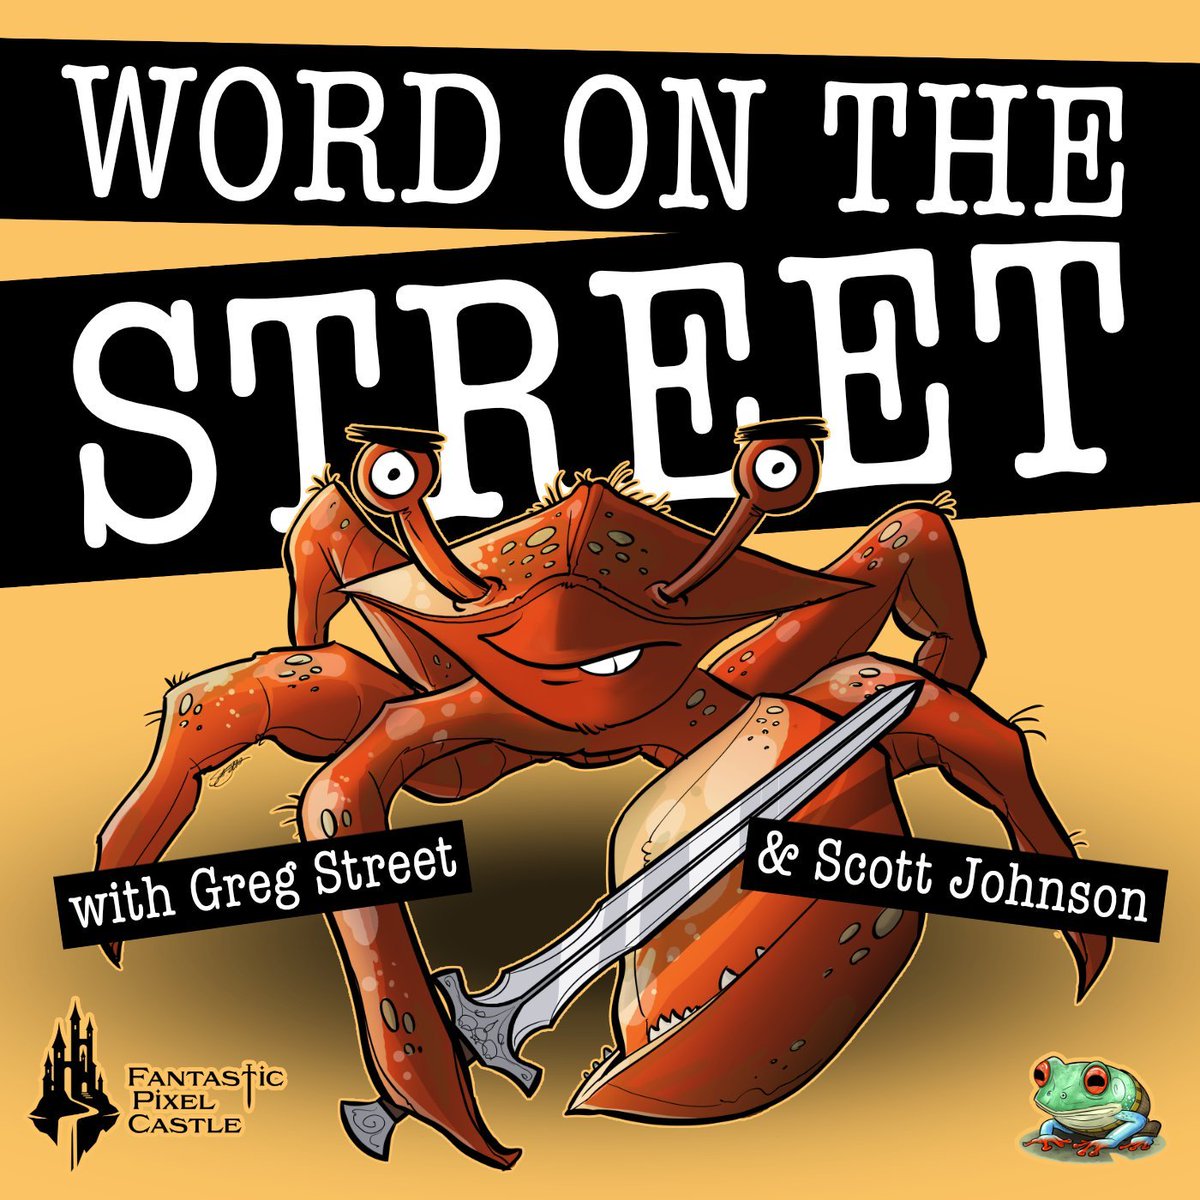 Our next episode of Word on the Street is tomorrow! Join @scottjohnson and @Ghostcrawler as they tackle the technical side of making an MMO with Engineering leads Cam and James! We'll be live here on March 12th, at 11:00 AM PT: bit.ly/WotSPodcast